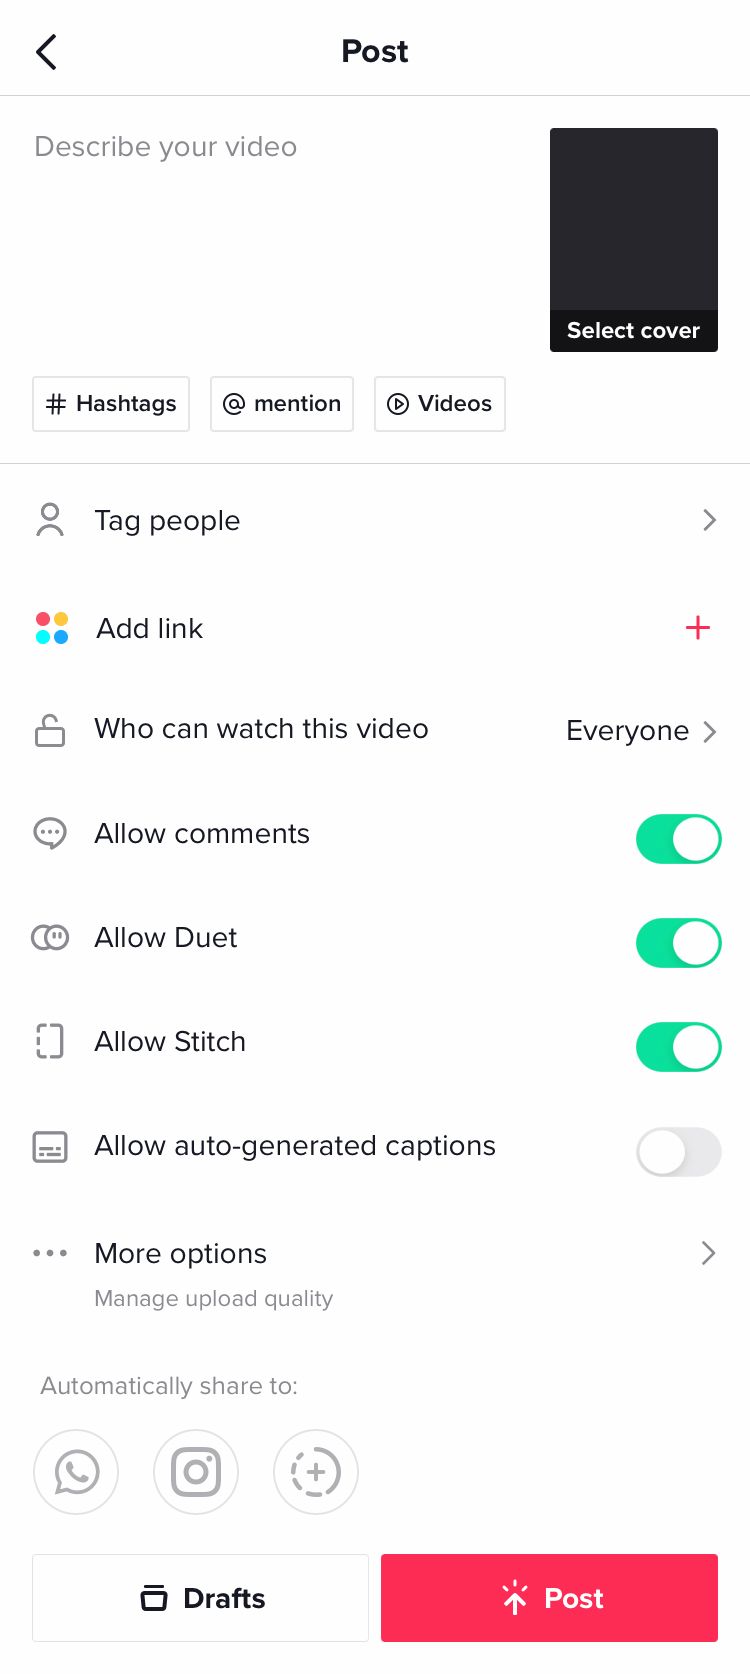 TikTok’s publication options screen for your TikTok video for posting or creating drafts